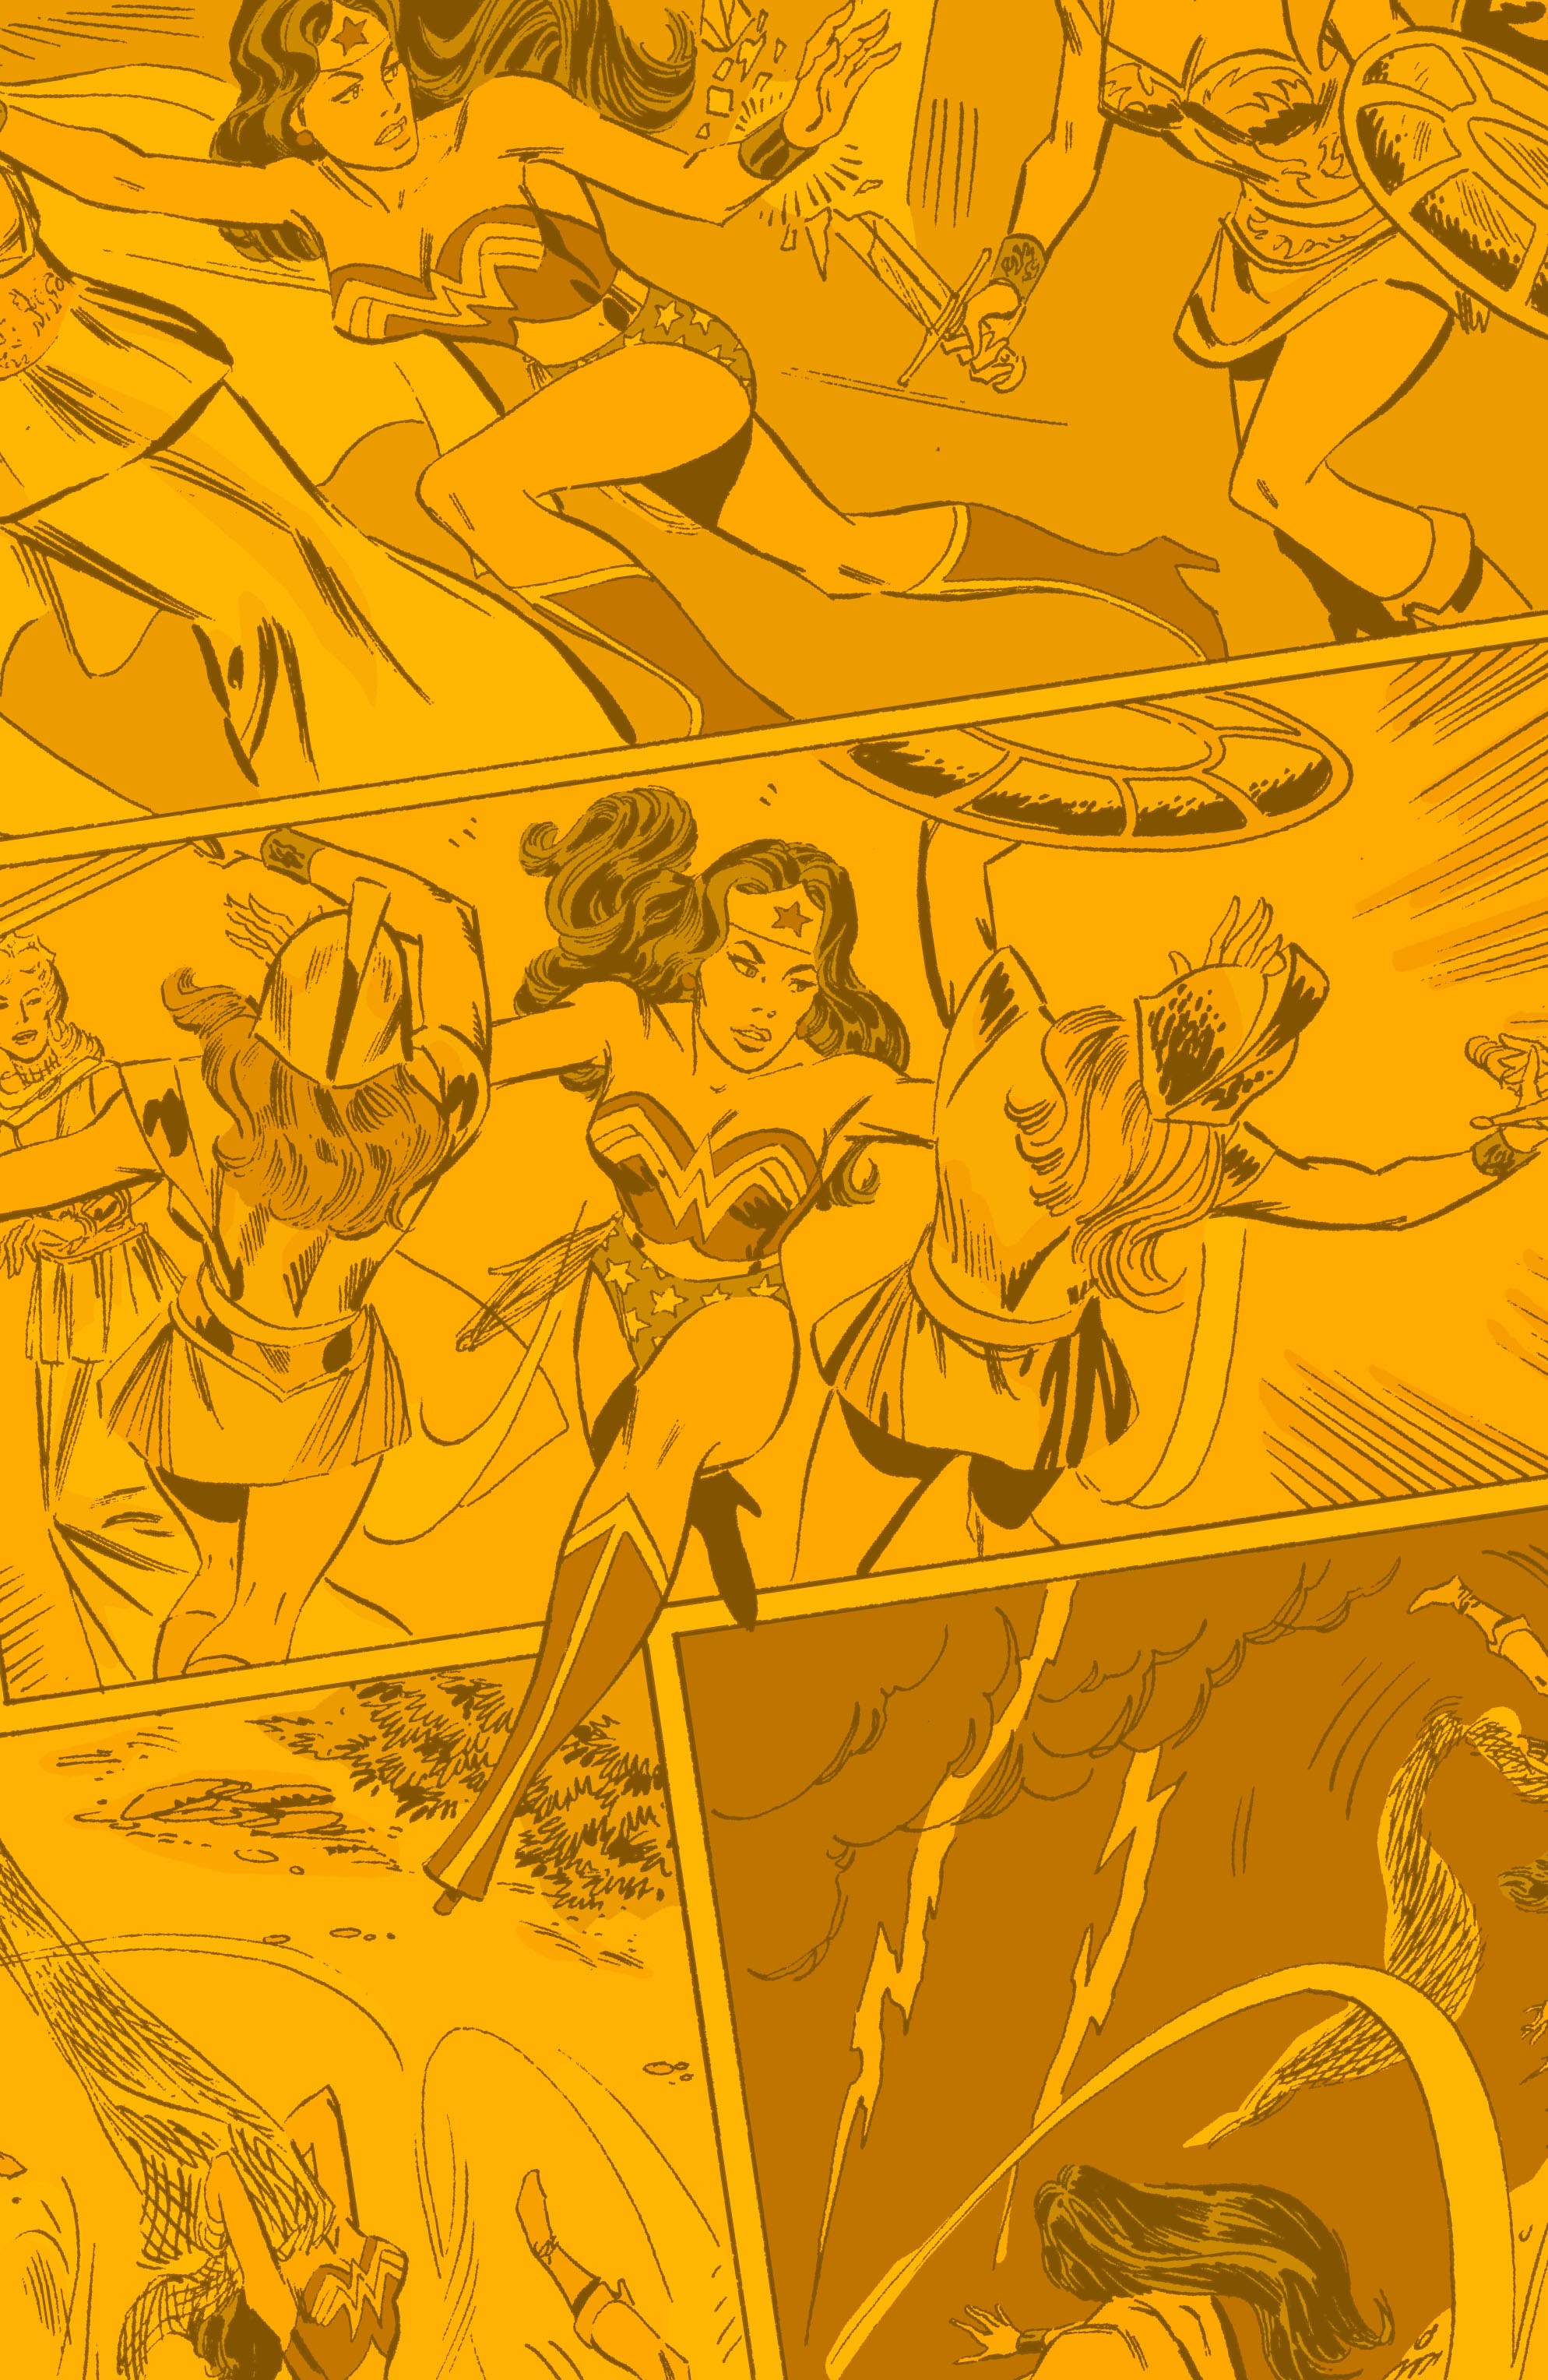 Read online Wonder Woman: Her Greatest Victories comic -  Issue # TPB (Part 1) - 9